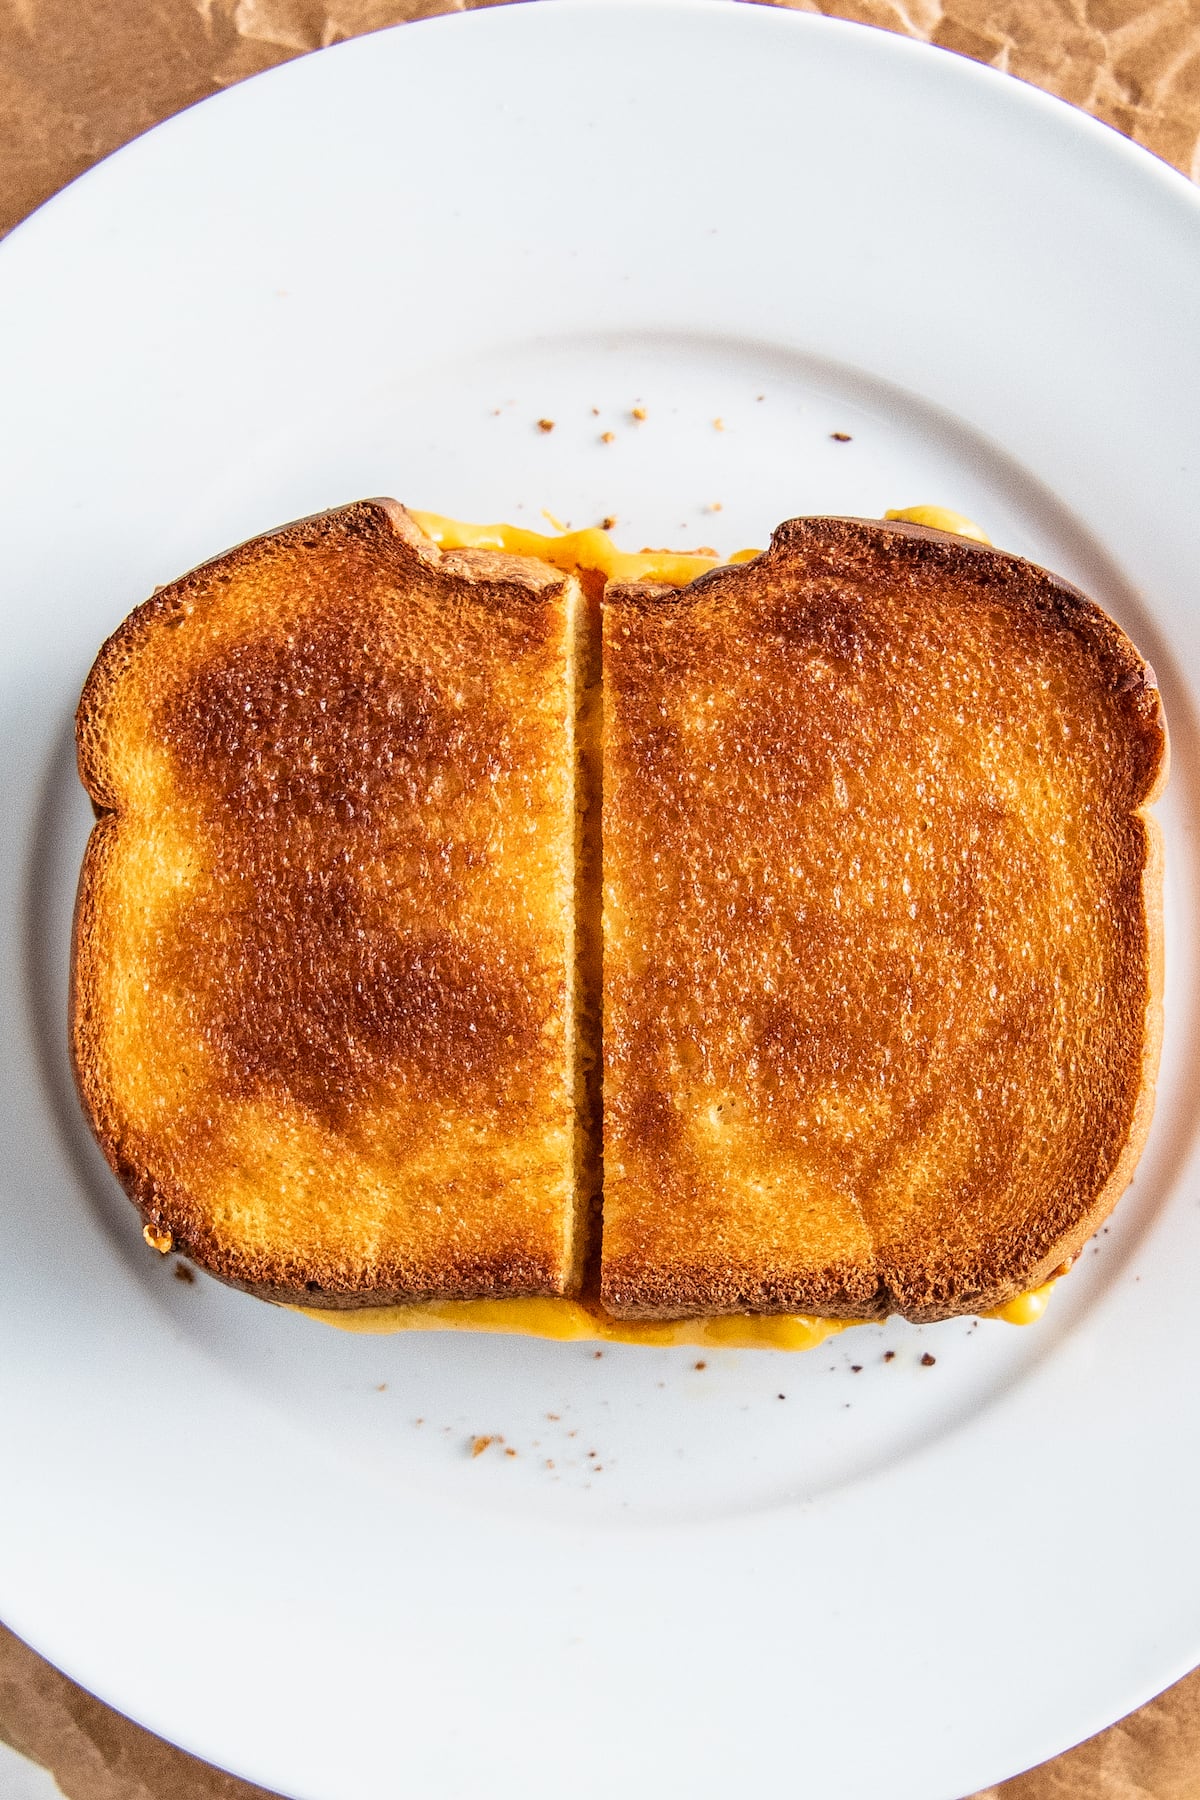 grileld cheese sandwich on a plate